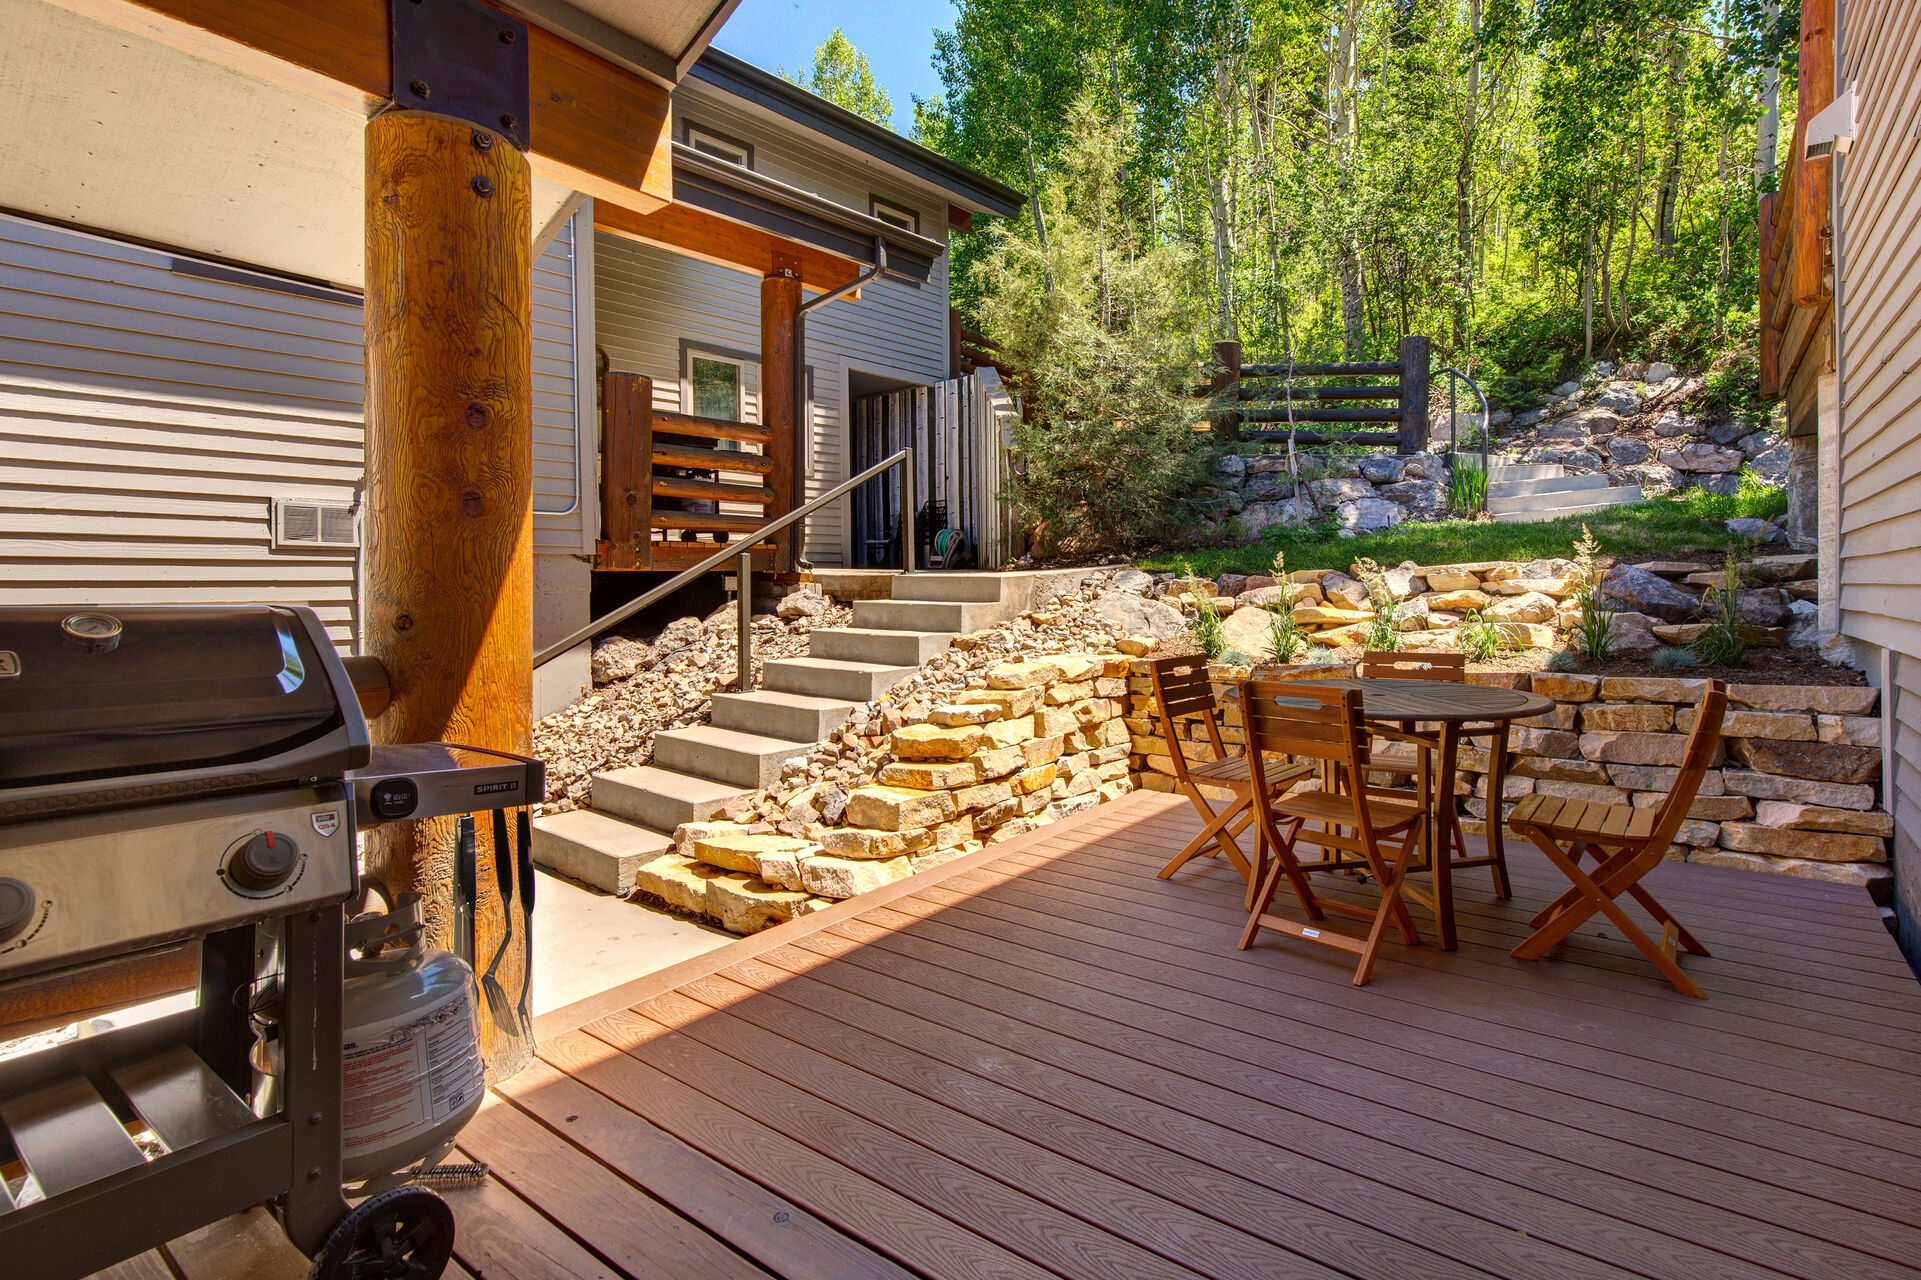 Main Level Patio off of kitchen with BBQ grill and table-seating for up to four